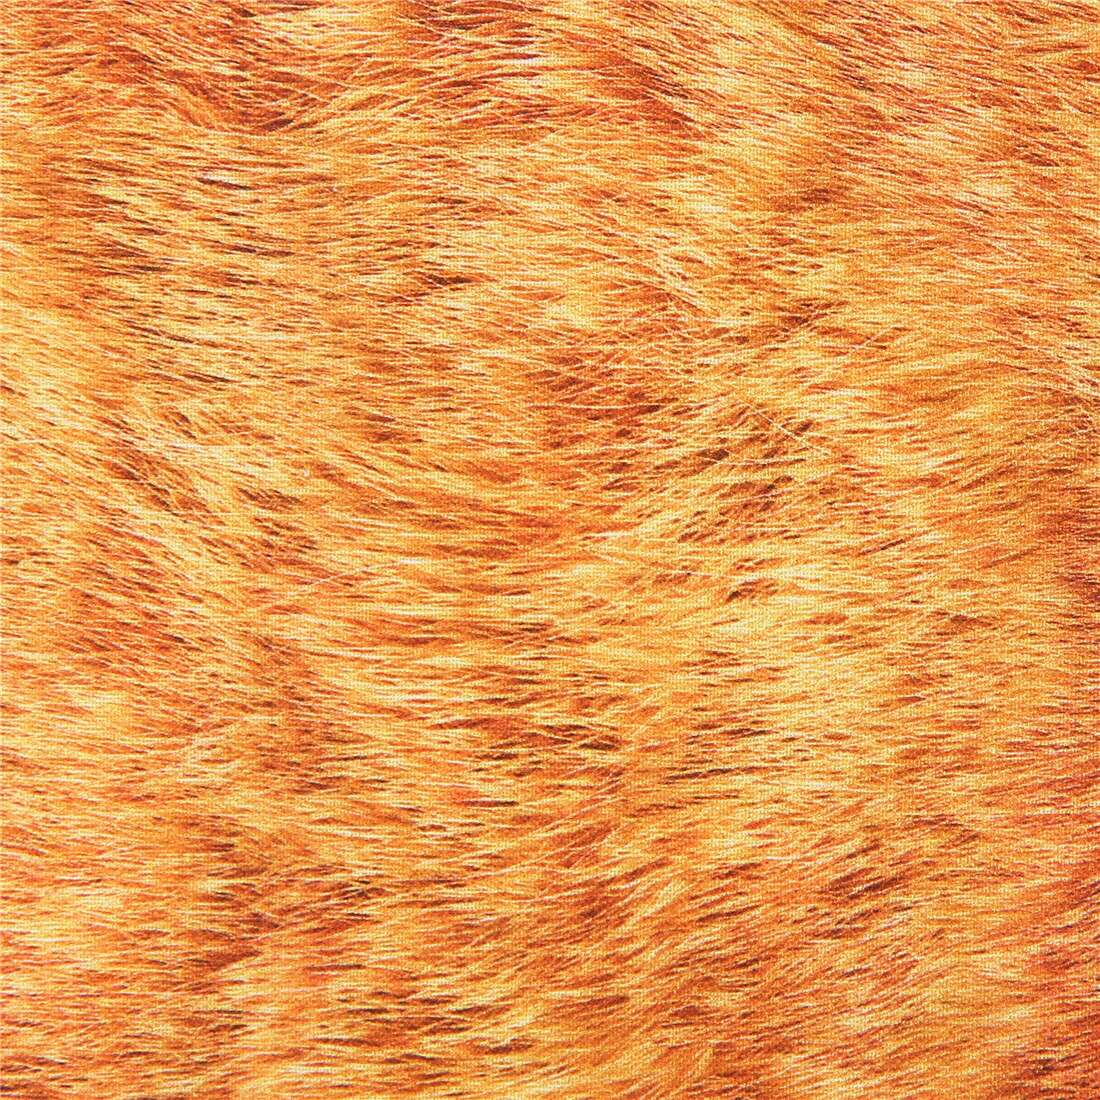 Brown Fur Realistic Print Fabric by Michael Miller - modeS4u